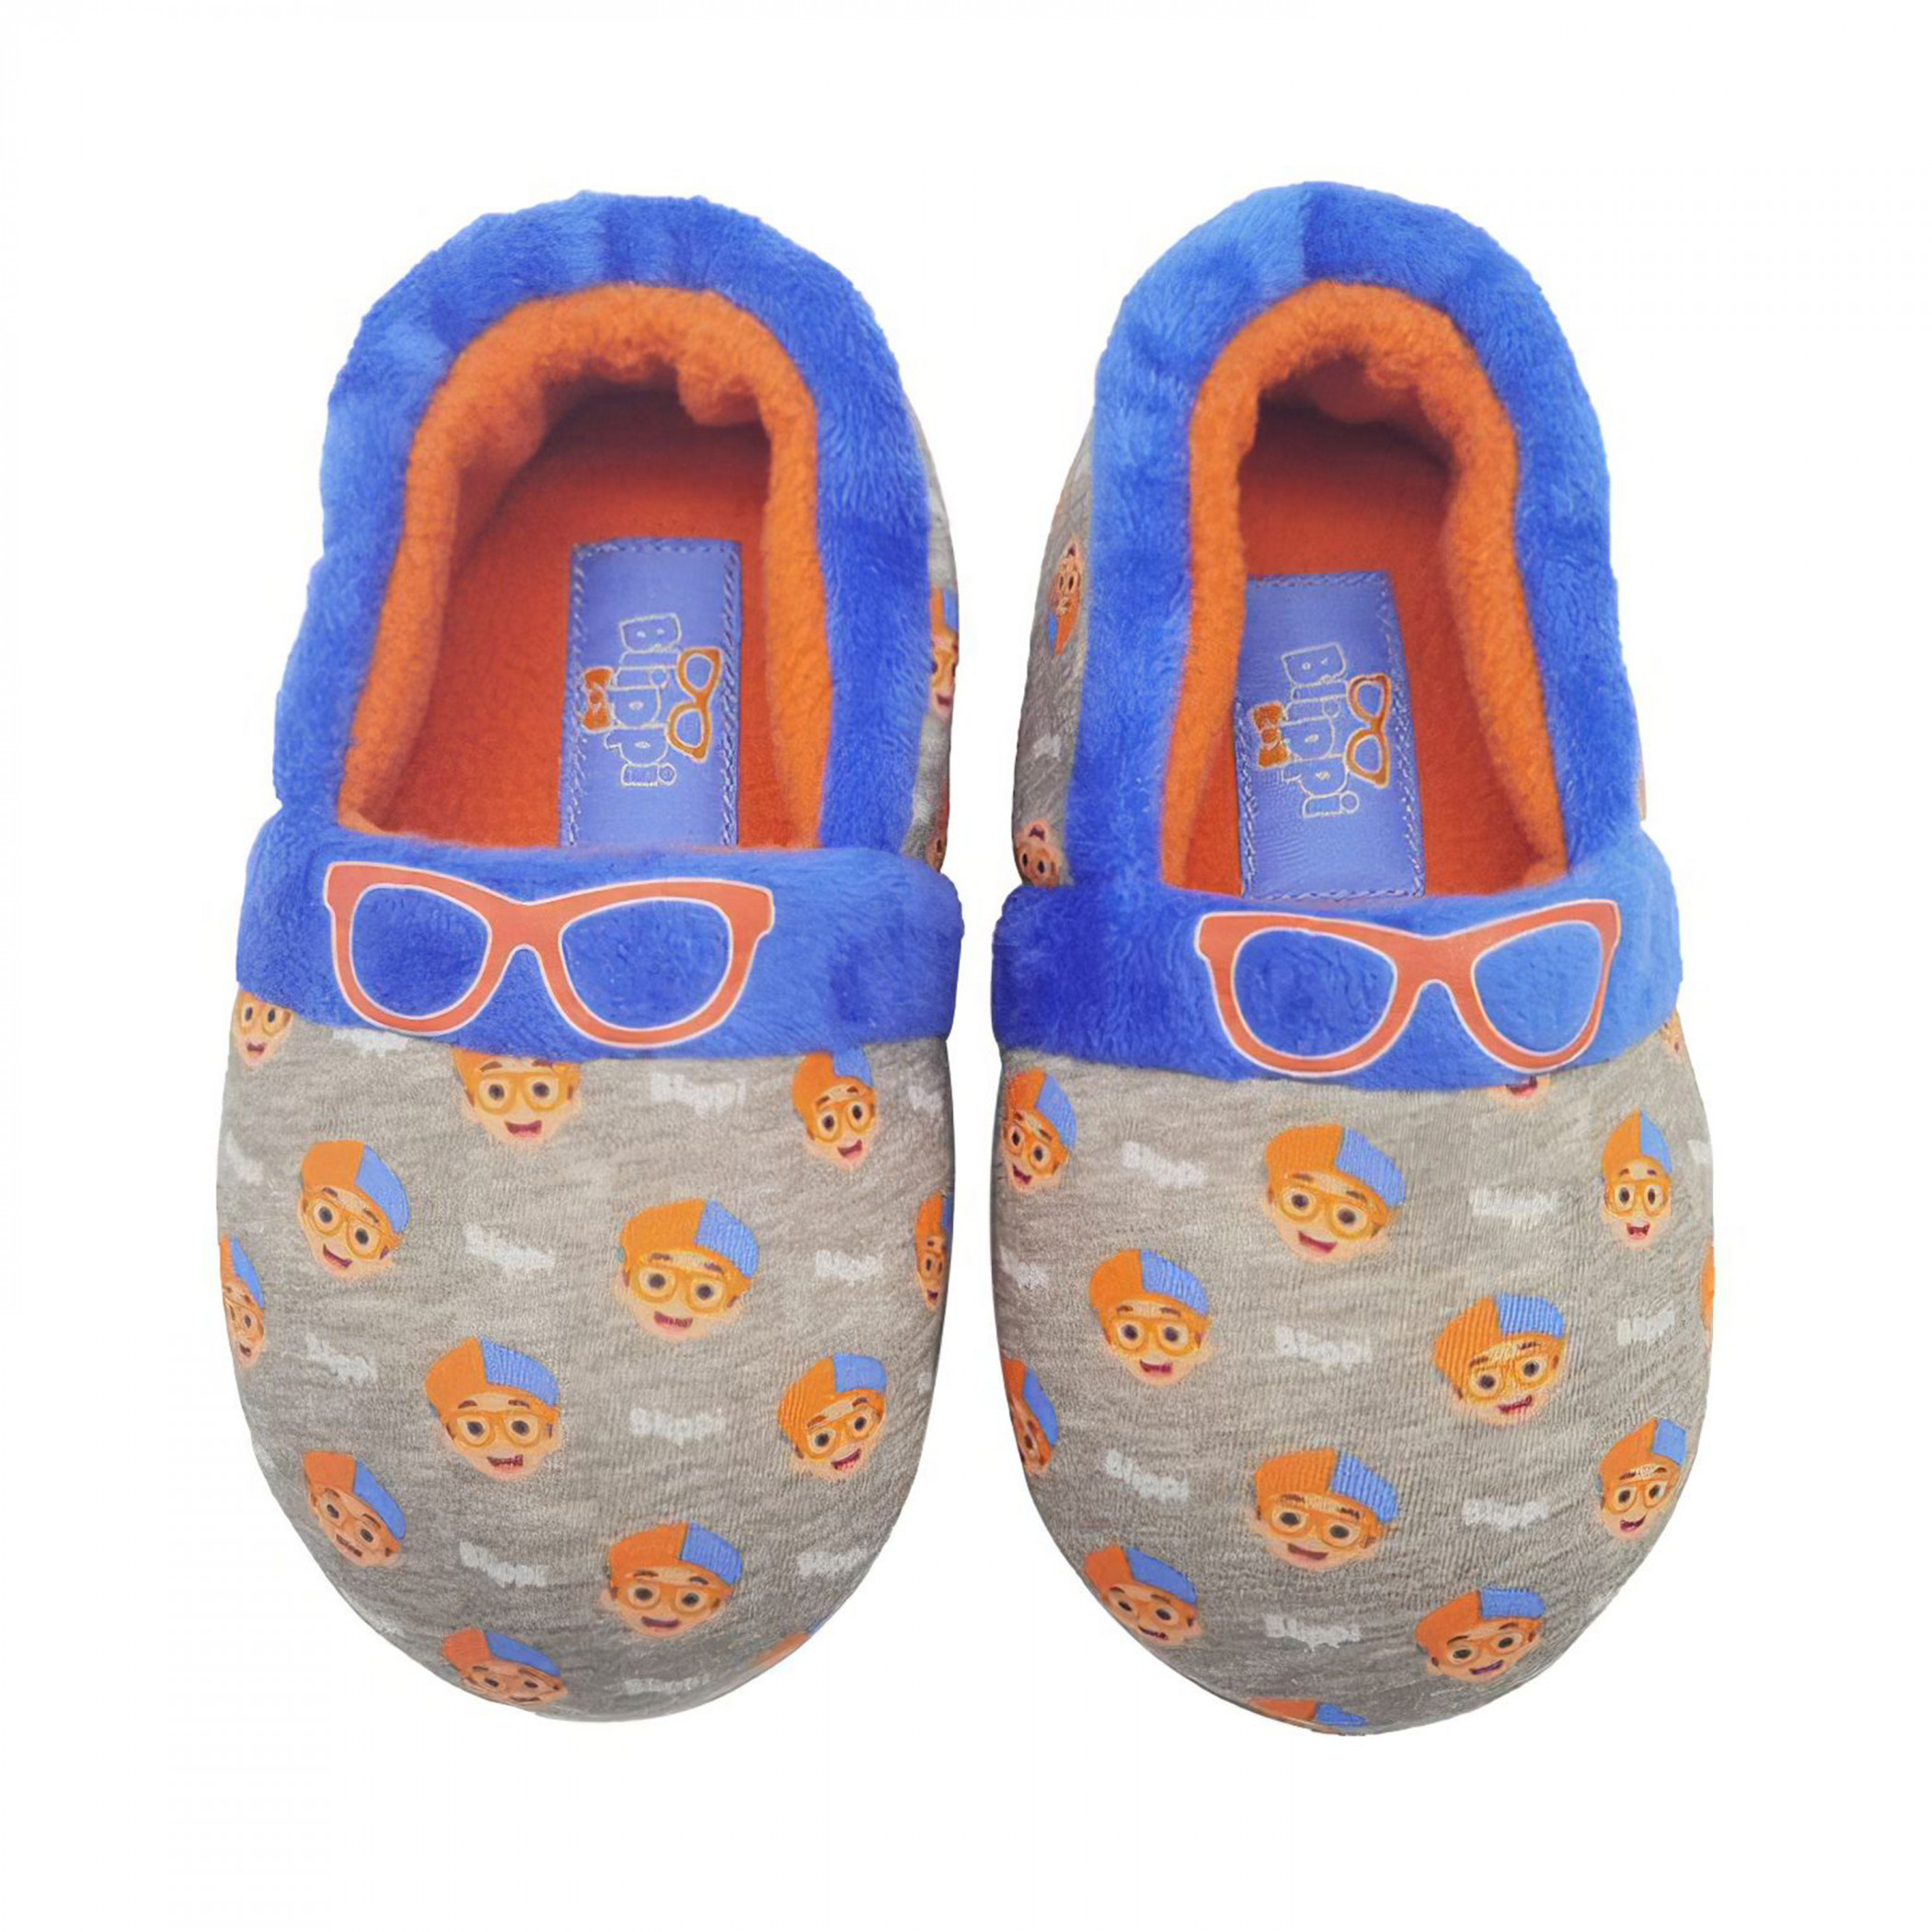 Blippi Shoes New for Sale in Fort Lauderdale, FL - OfferUp